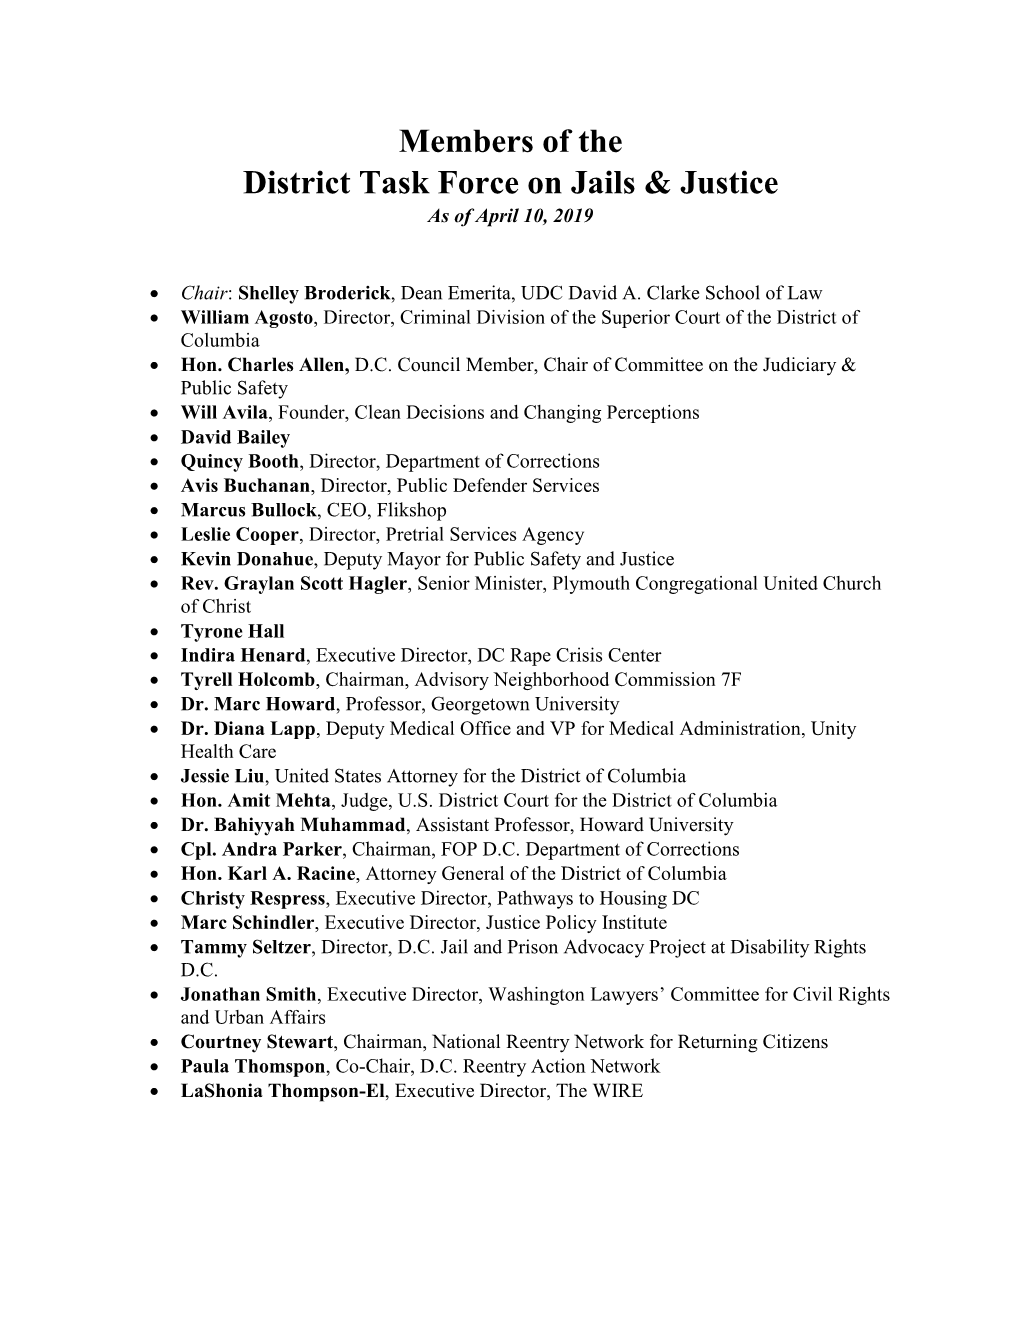 Members of the District Task Force on Jails & Justice